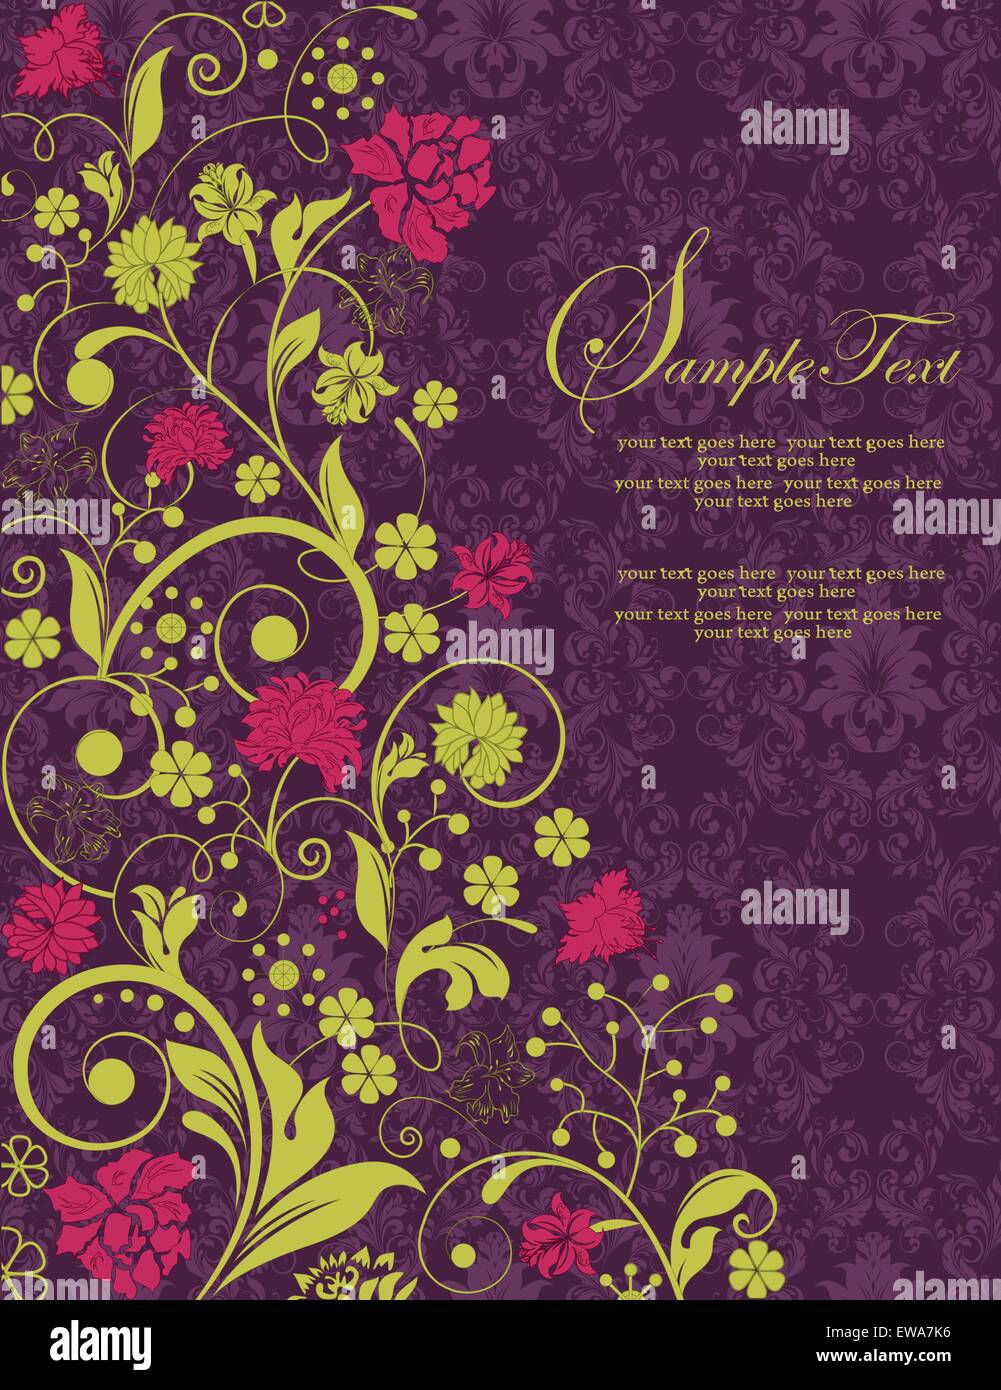 Vintage invitation card with ornate elegant retro abstract floral design, red and yellow green flowers and leaves on dark purple background. Vector illustration. Stock Vector